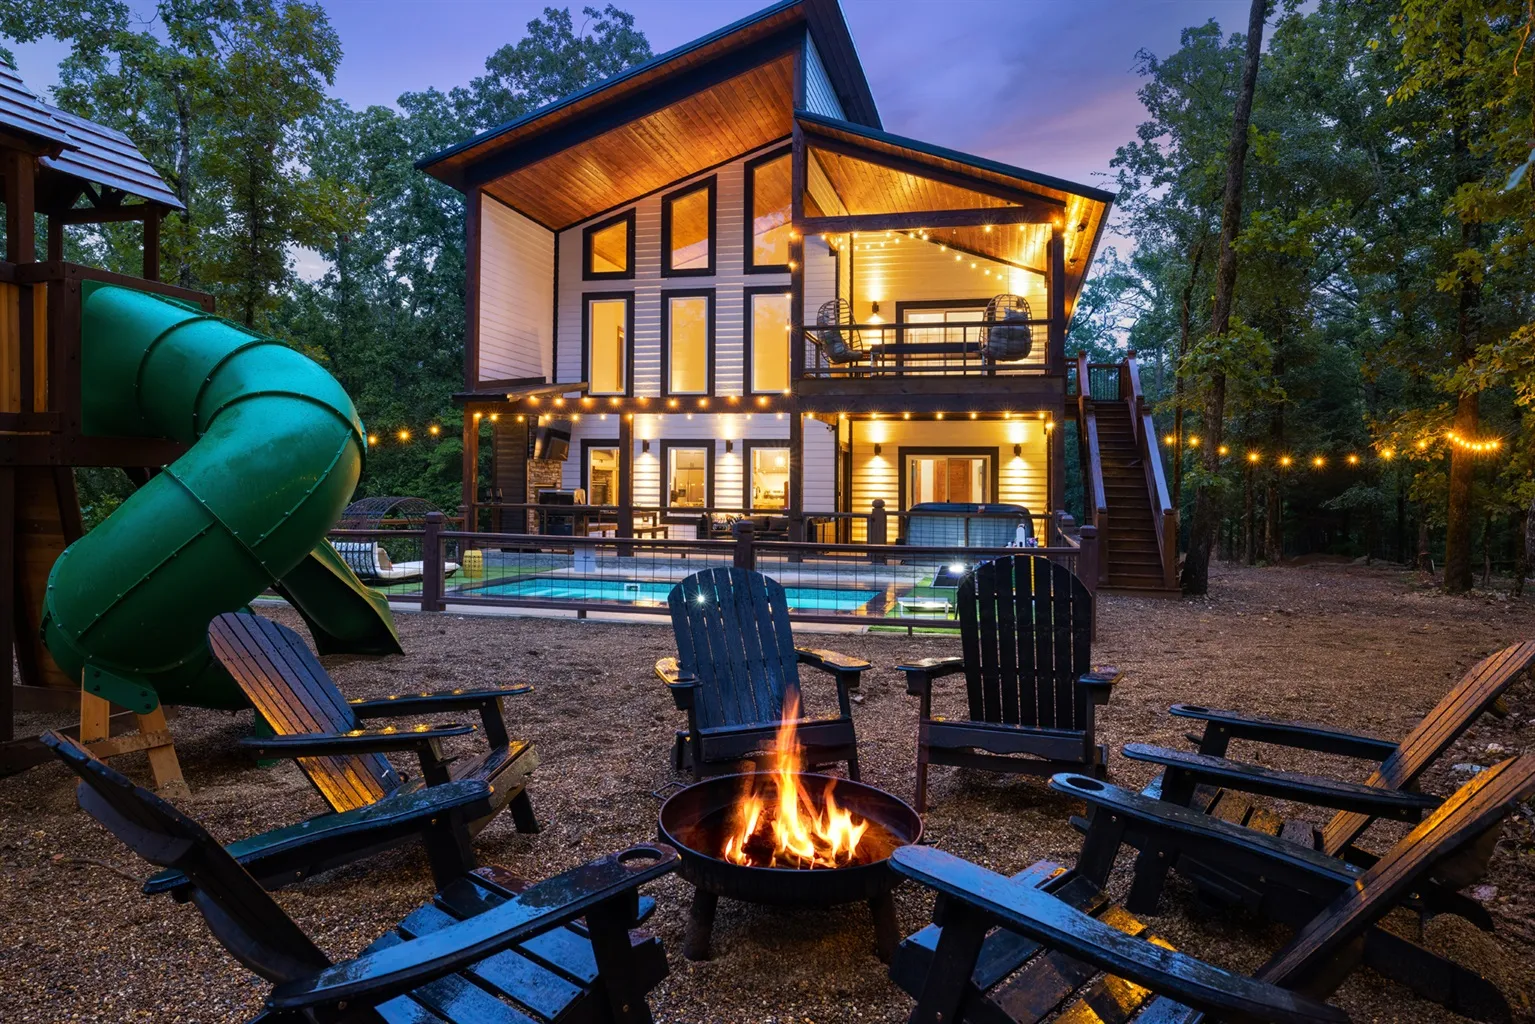 Exterior shot of a modern three story cabin set in woodland. Fire pit and childrens' slide in the foreground.